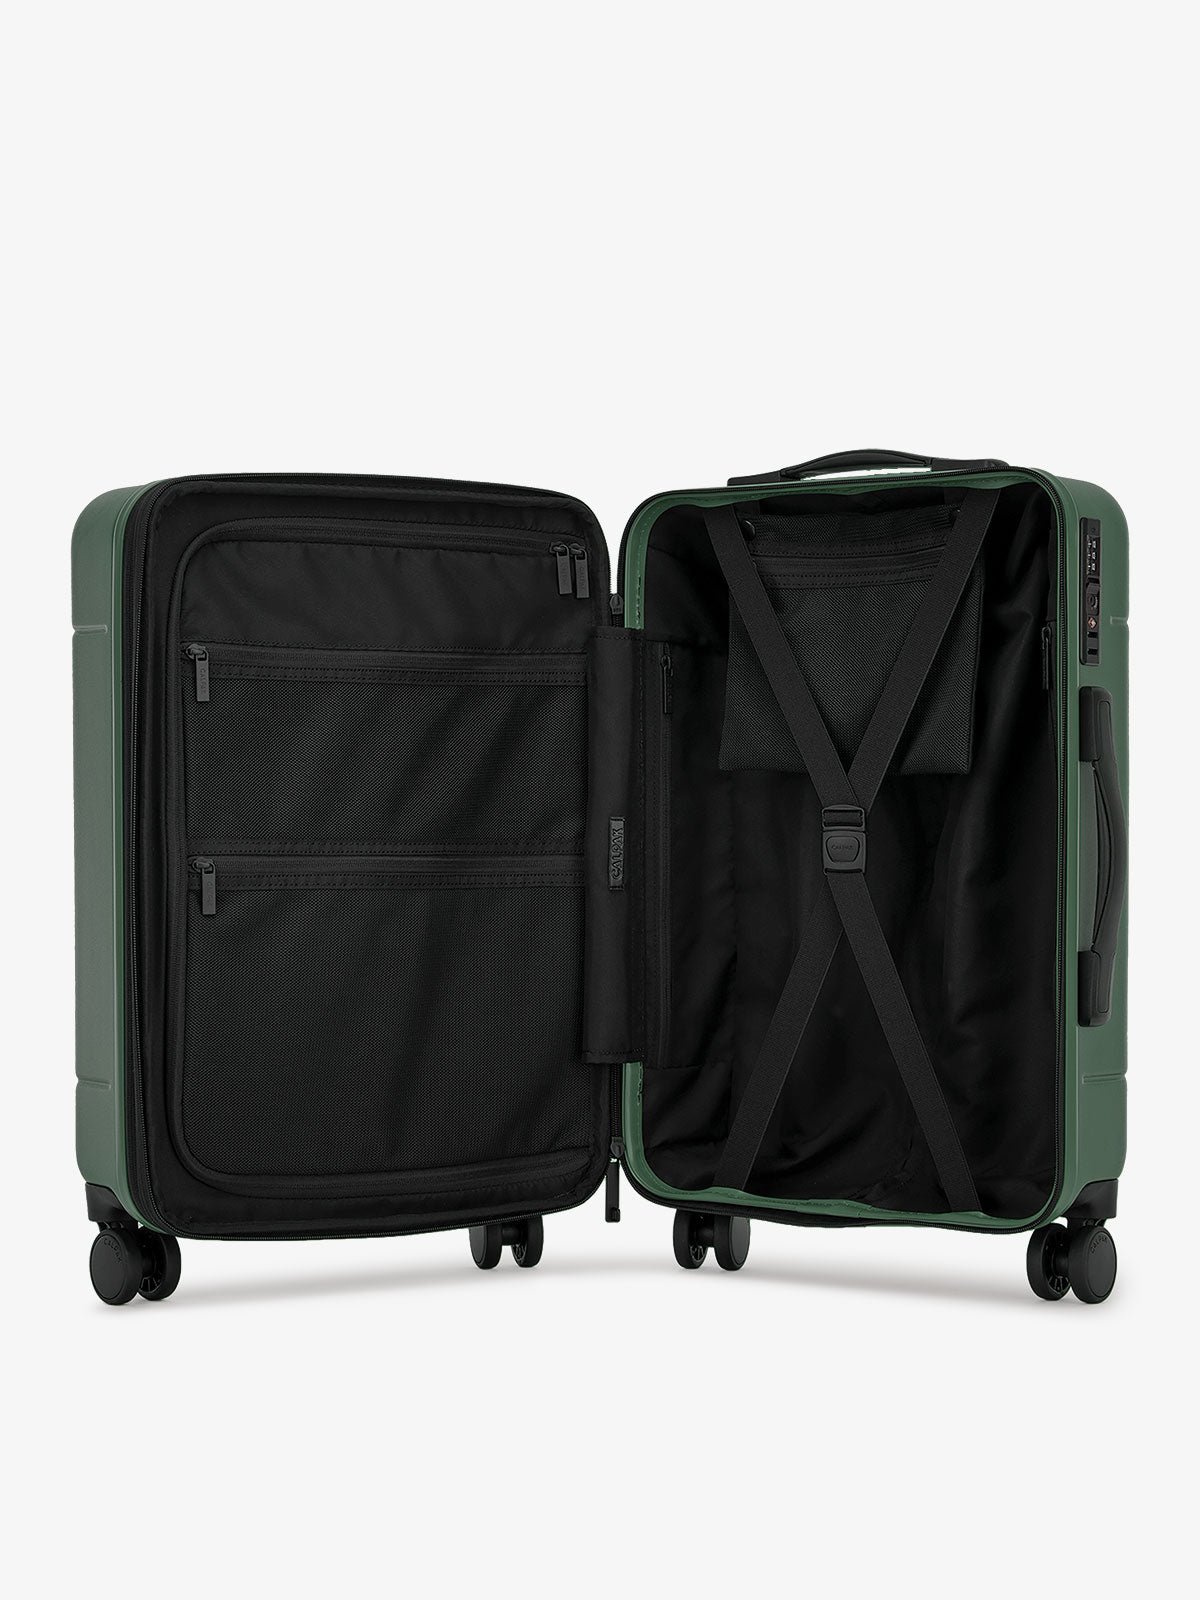 Interior of Hue rolling carry-on suitcase in emerald green